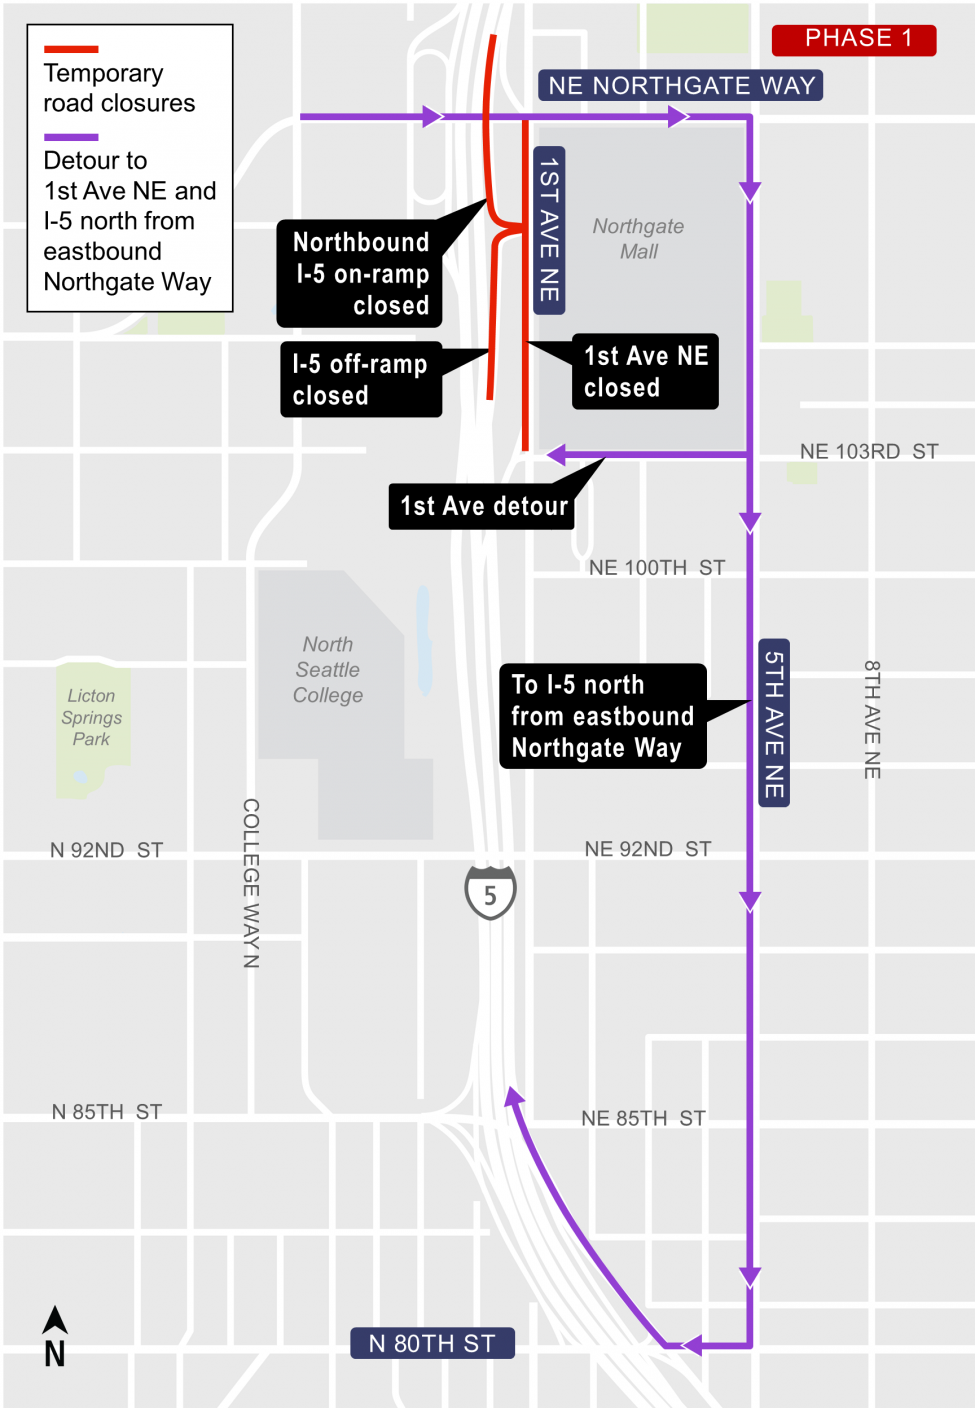 Part one of Phase one of traffic detours near Northgate Transit Center.